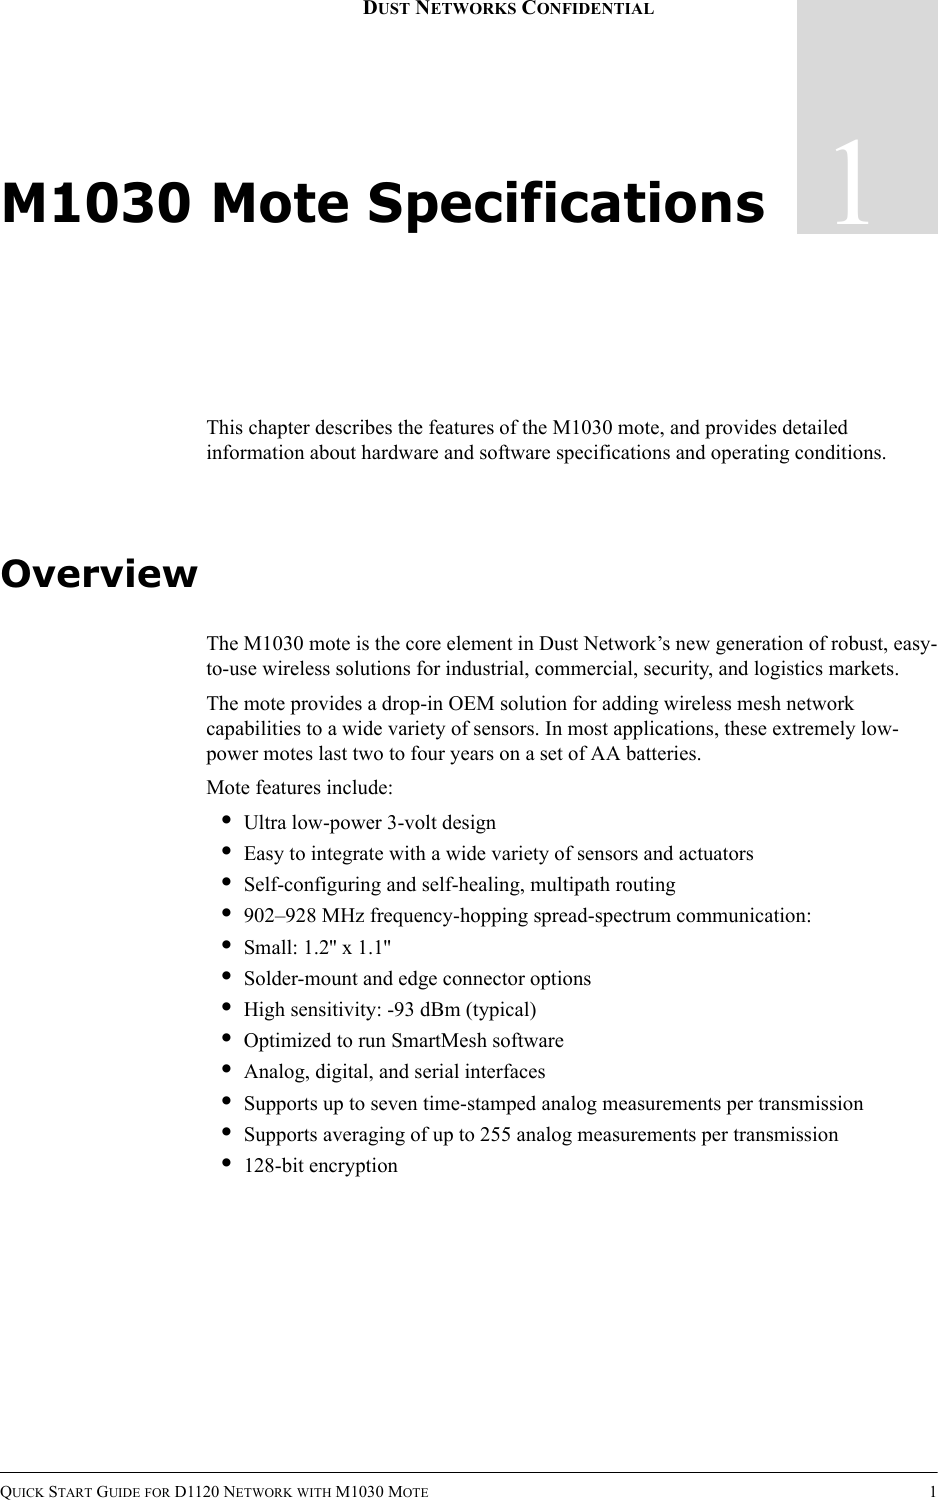 QUICK START GUIDE FOR D1120 NETWORK WITH M1030 MOTE 11DUST NETWORKS CONFIDENTIALM1030 Mote SpecificationsThis chapter describes the features of the M1030 mote, and provides detailed information about hardware and software specifications and operating conditions.OverviewThe M1030 mote is the core element in Dust Network’s new generation of robust, easy-to-use wireless solutions for industrial, commercial, security, and logistics markets.The mote provides a drop-in OEM solution for adding wireless mesh network capabilities to a wide variety of sensors. In most applications, these extremely low-power motes last two to four years on a set of AA batteries.Mote features include:•Ultra low-power 3-volt design•Easy to integrate with a wide variety of sensors and actuators•Self-configuring and self-healing, multipath routing•902–928 MHz frequency-hopping spread-spectrum communication:•Small: 1.2&apos;&apos; x 1.1&apos;&apos;•Solder-mount and edge connector options•High sensitivity: -93 dBm (typical)•Optimized to run SmartMesh software•Analog, digital, and serial interfaces•Supports up to seven time-stamped analog measurements per transmission•Supports averaging of up to 255 analog measurements per transmission•128-bit encryption